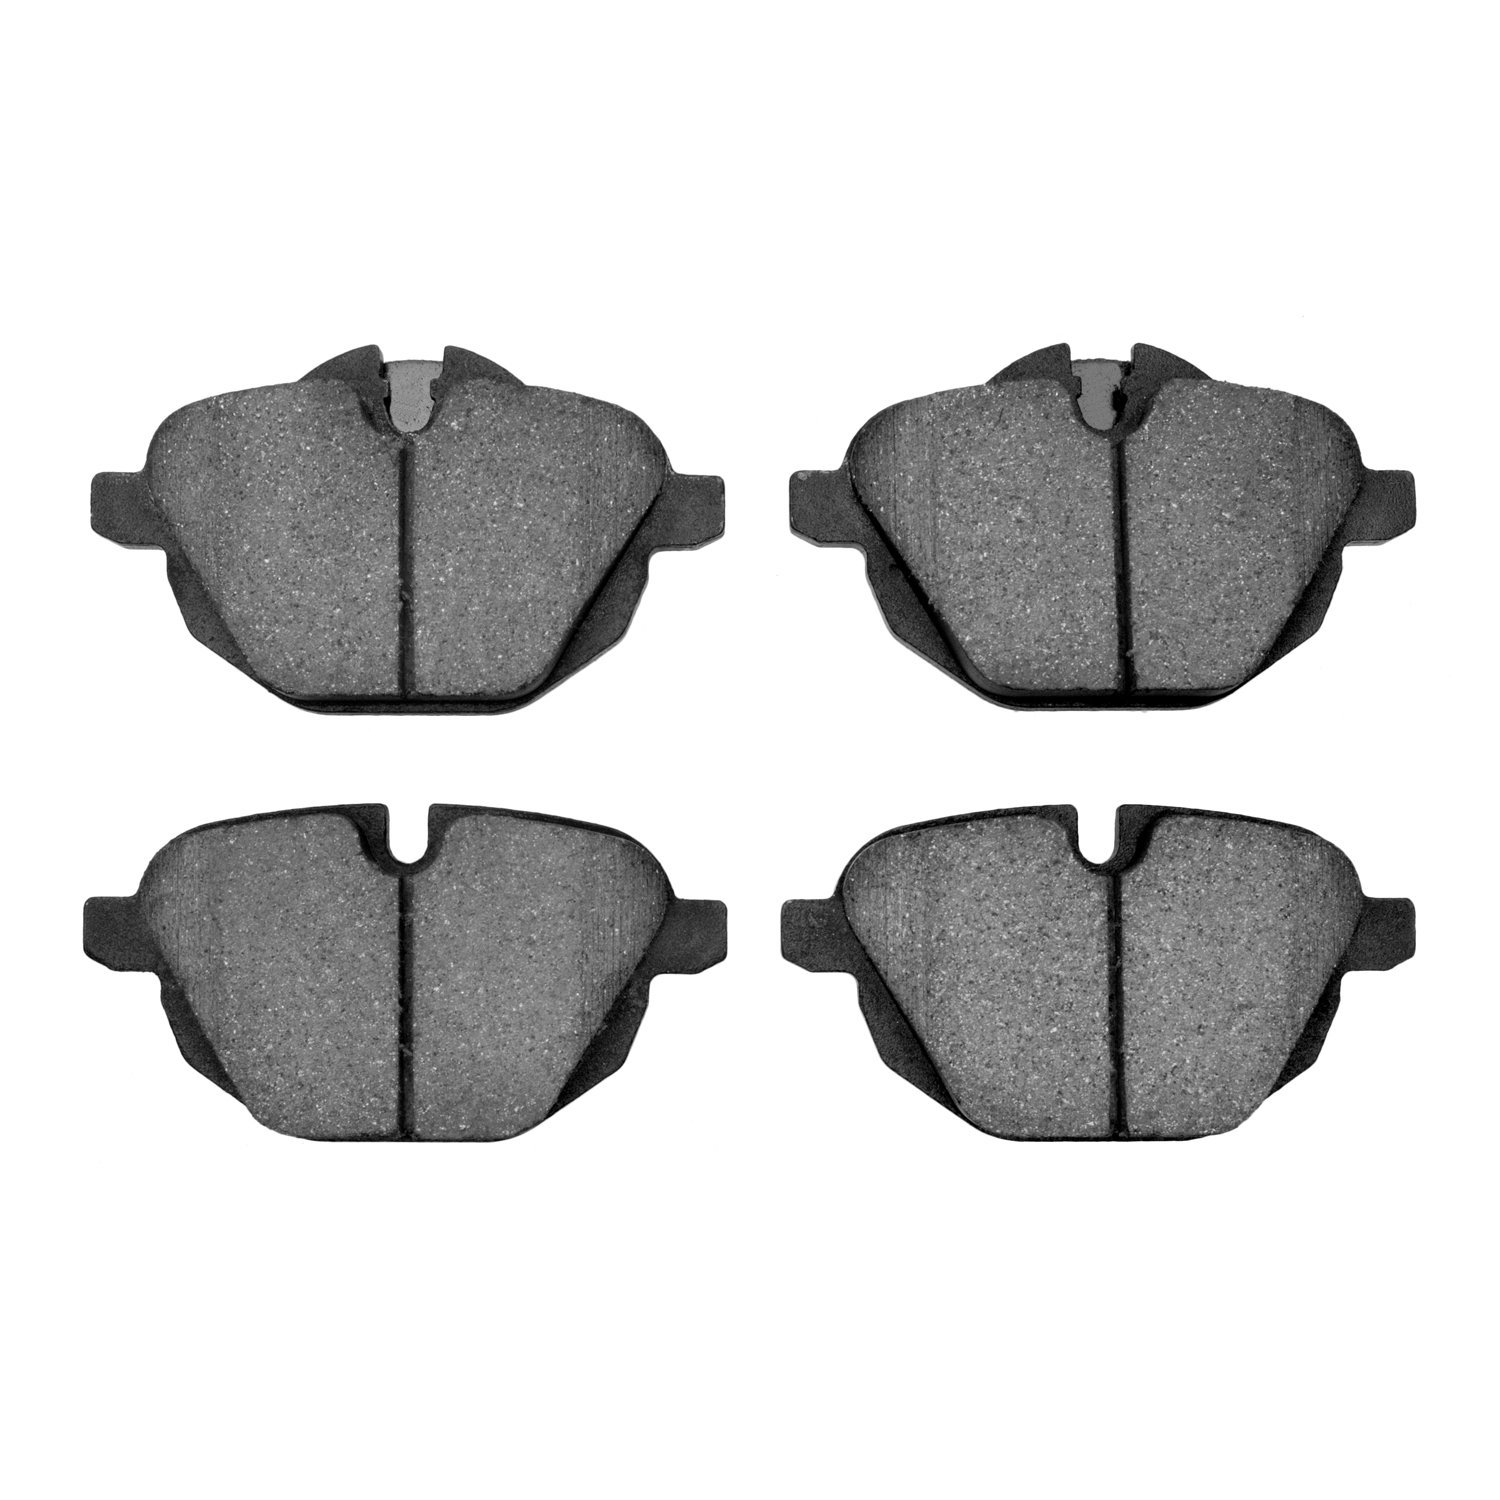 Track/Street Brake Pads, Fits Select BMW, Position: Rear